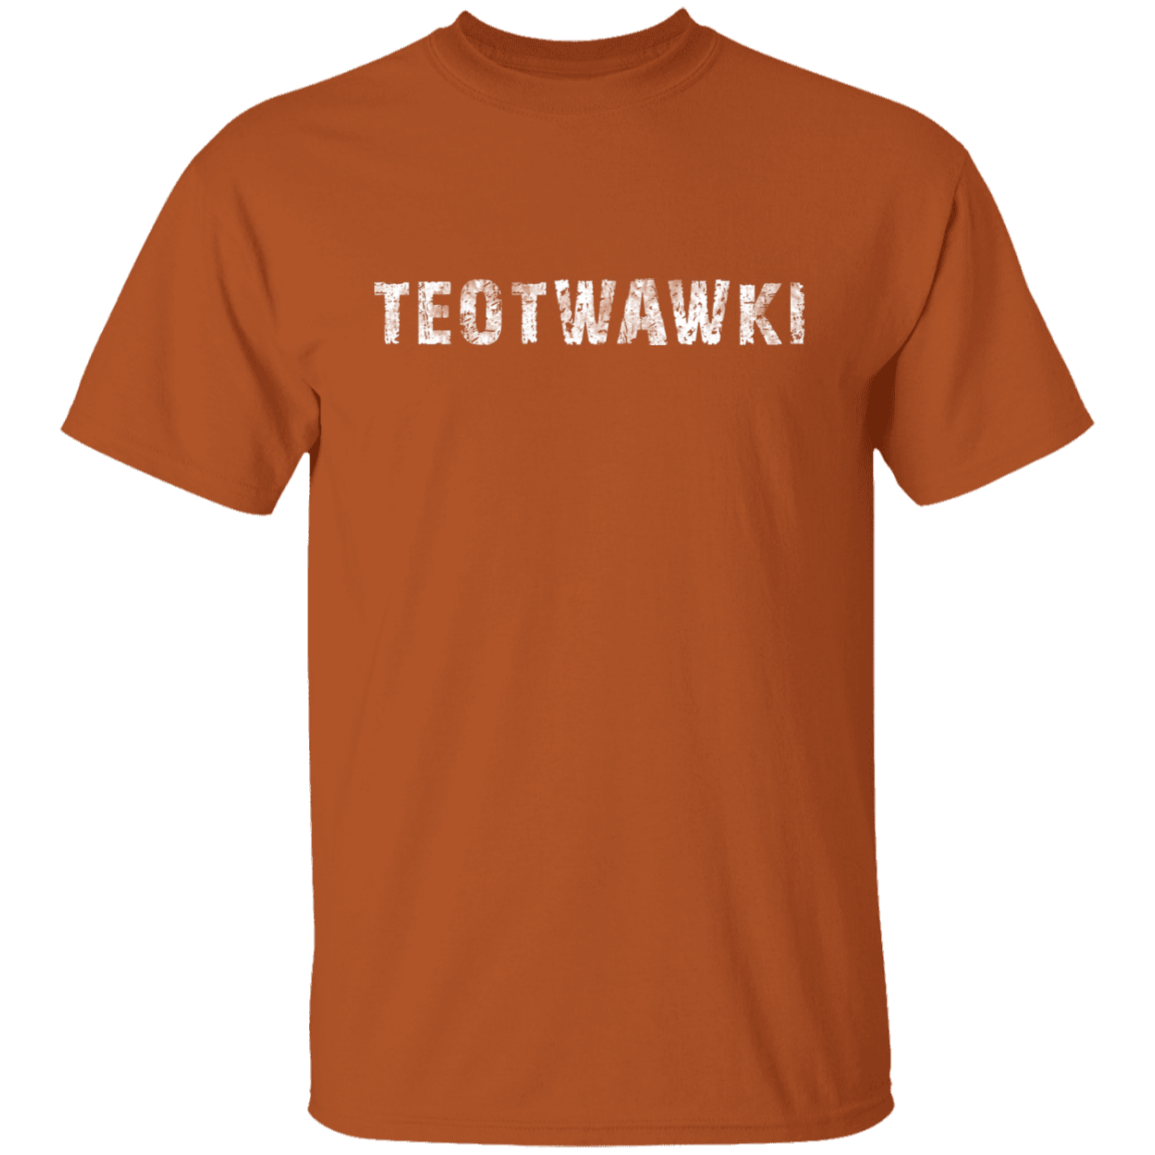 TEOTWAWKI THE END OF THE WORLD TEE